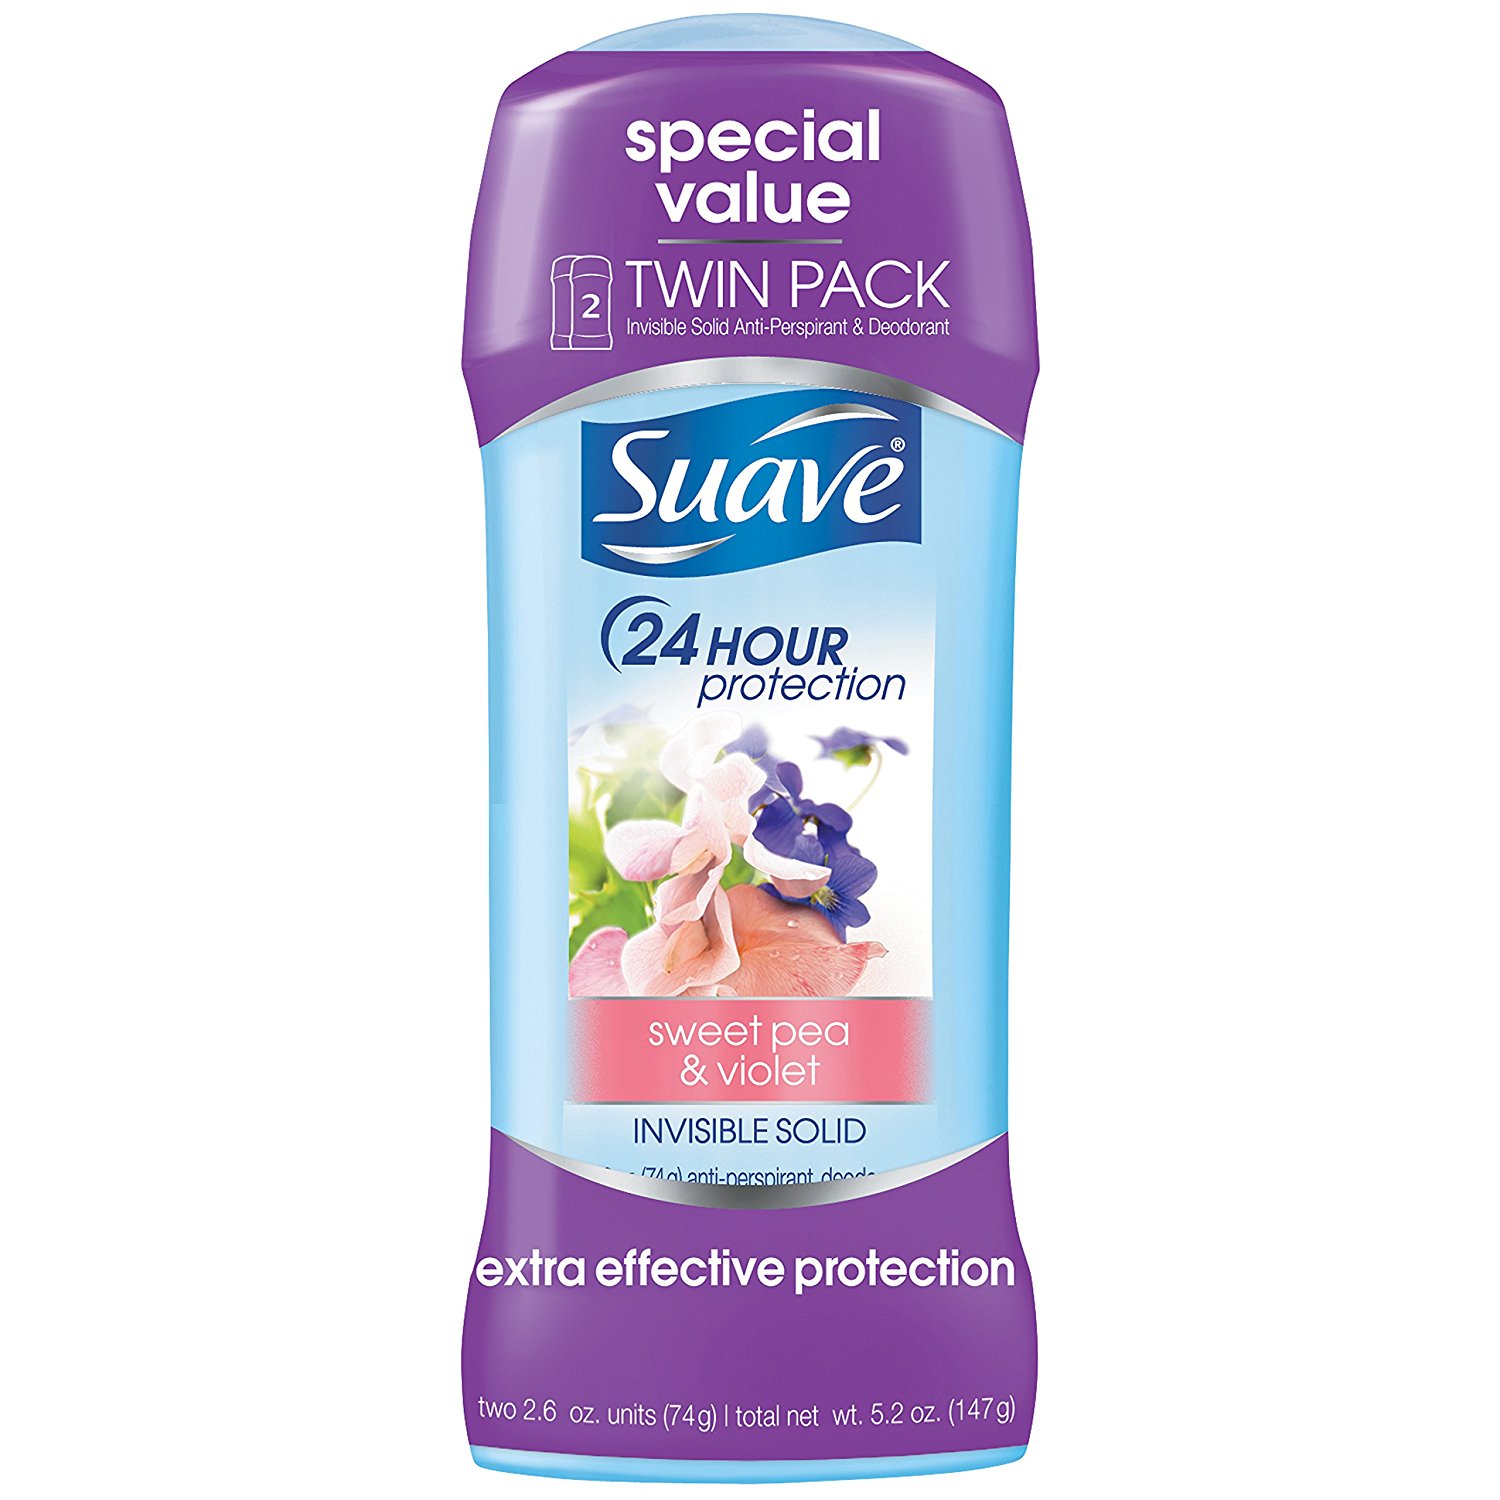 Suave Antiperspirant Deodorant (Sweet Pea and Violet) 2 Pack Only $2.34 Shipped!